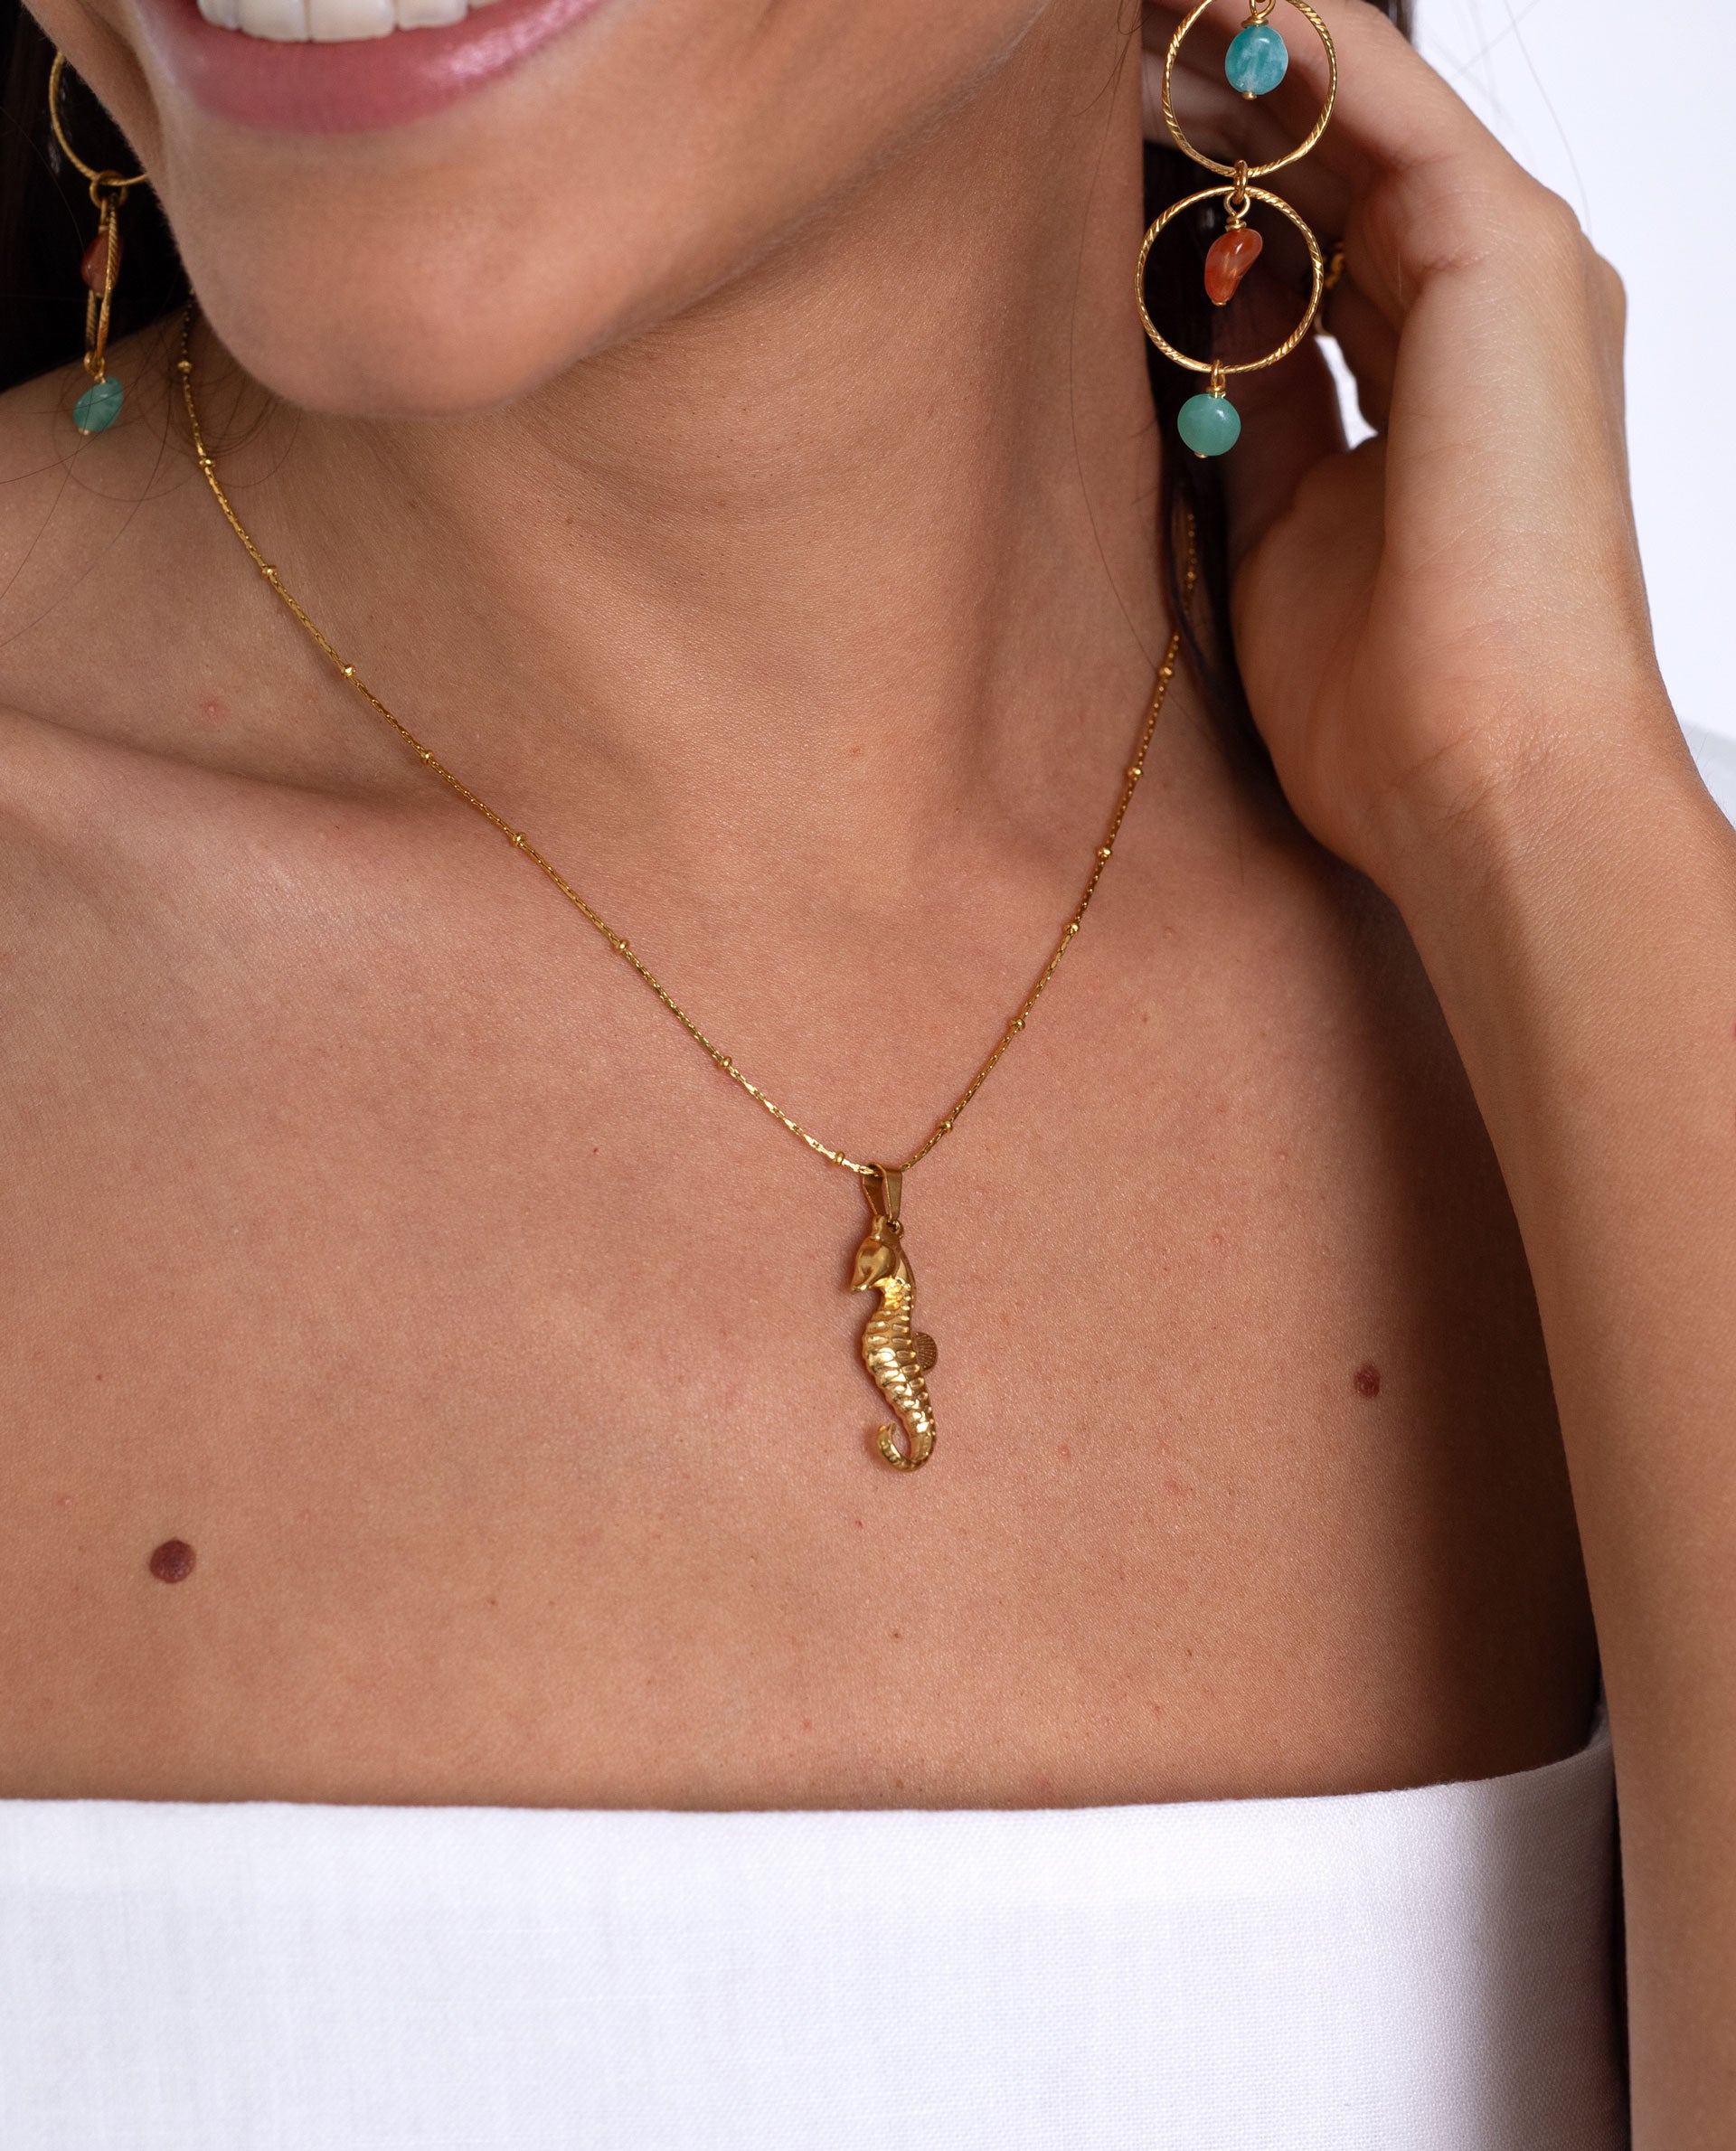 SEAHORSE NECKLACE - GOLD PLATED STEEL